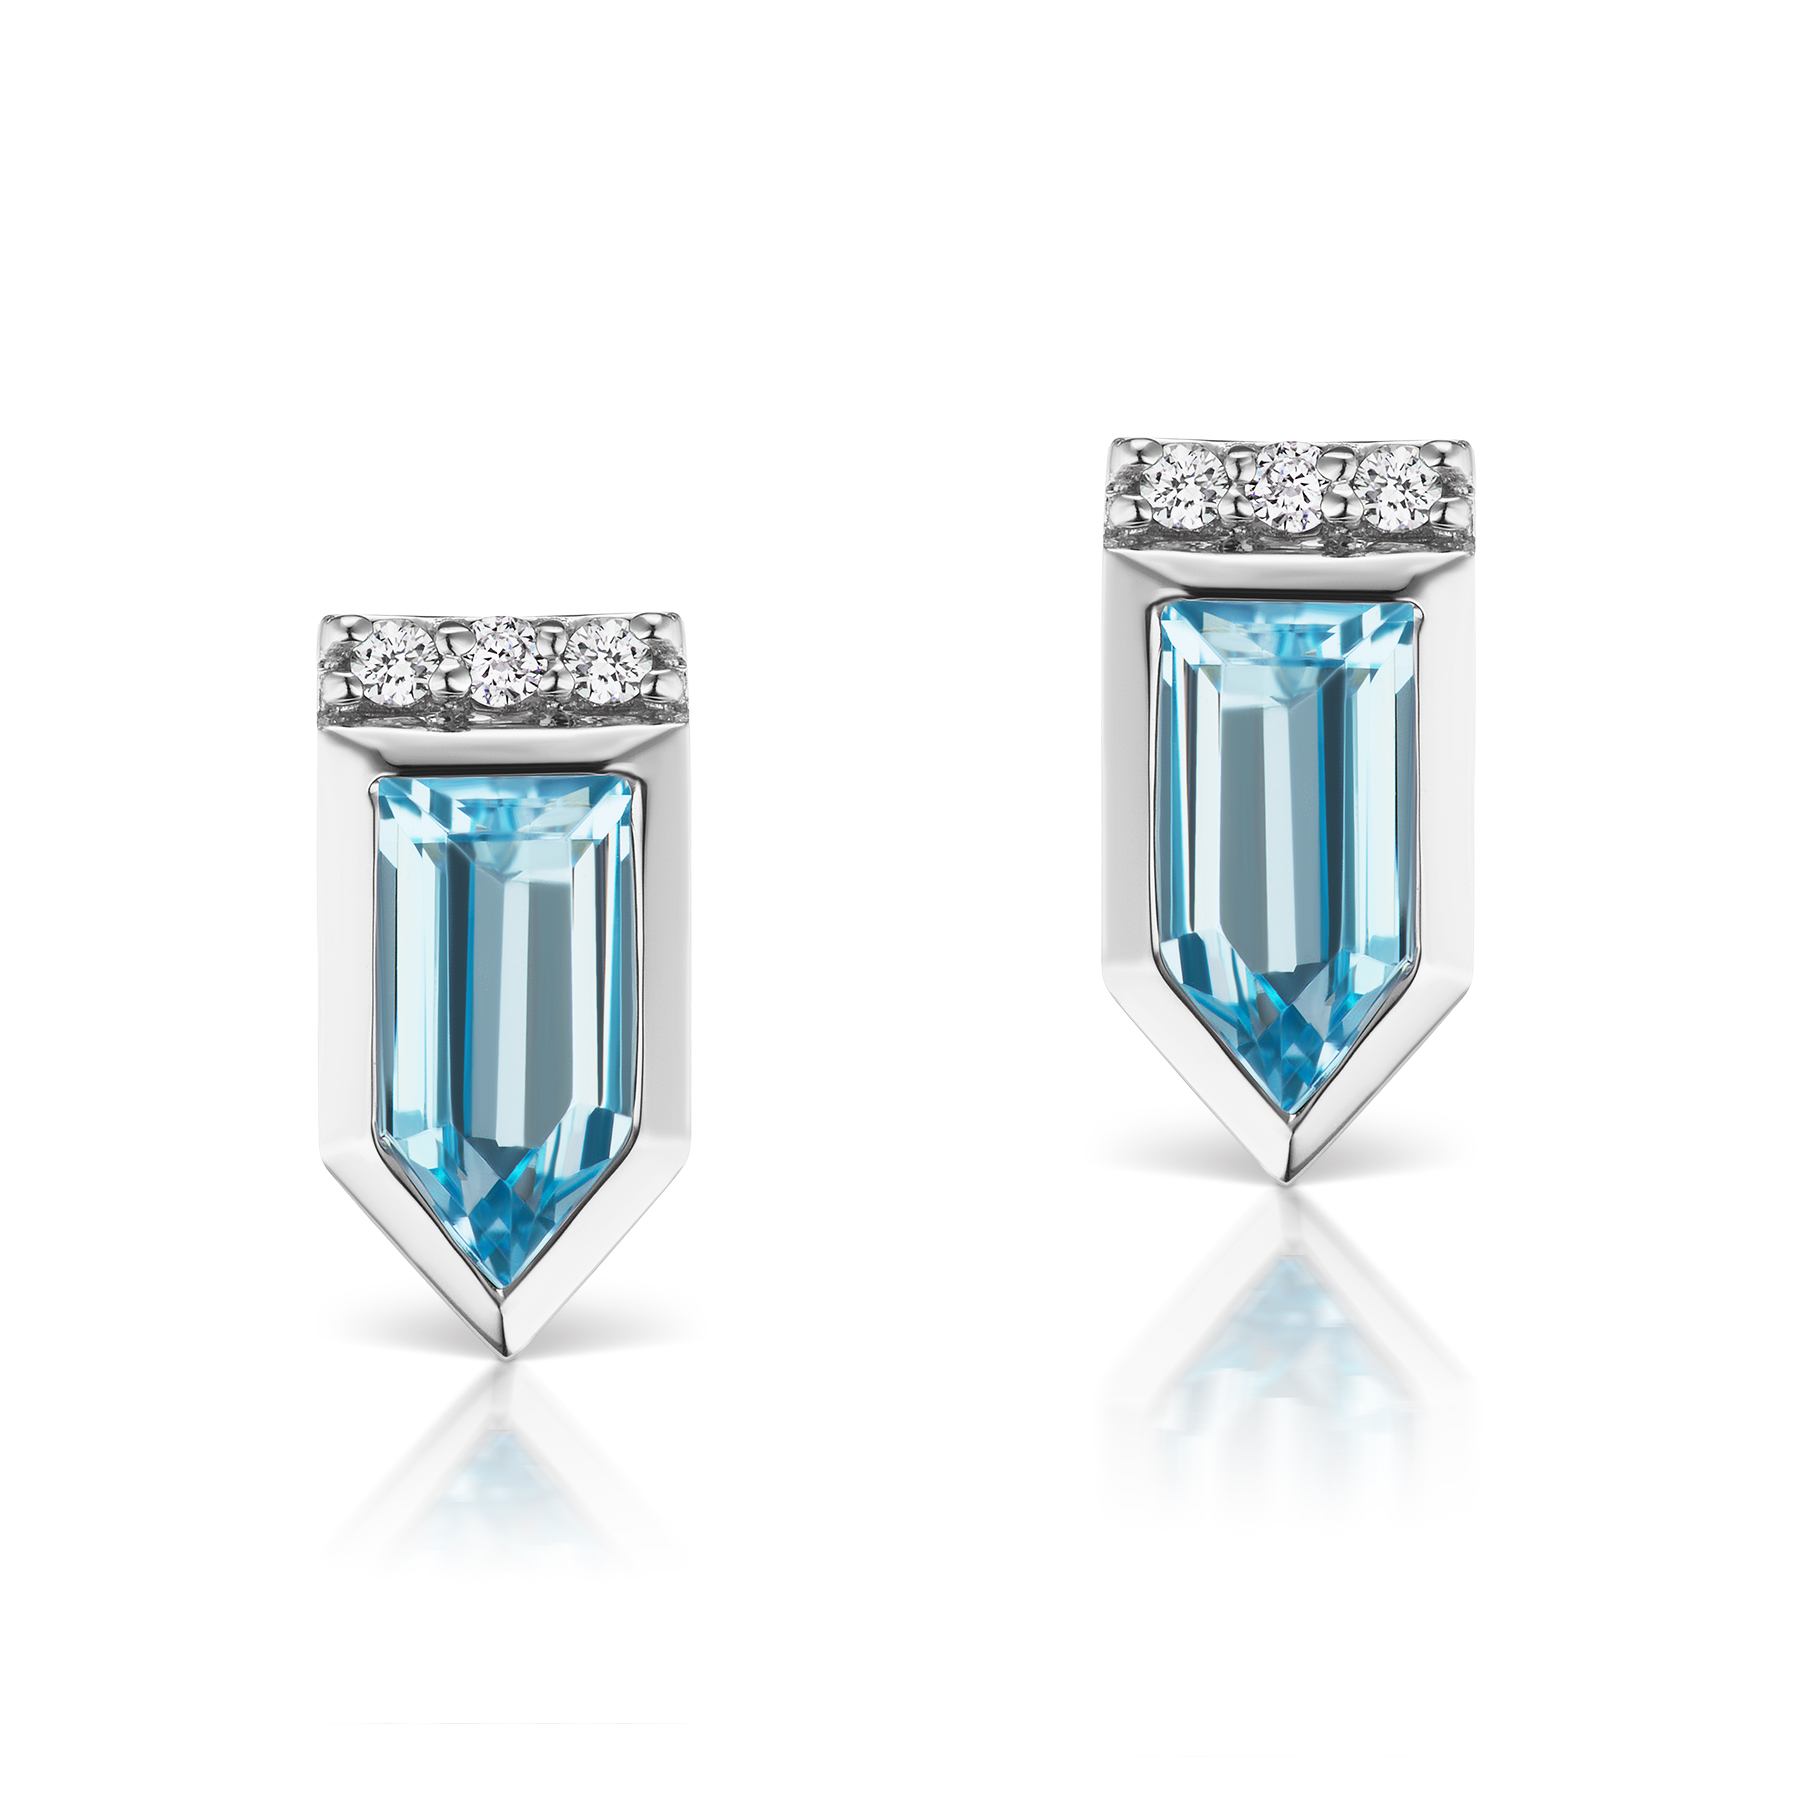 14K White Gold Gemstone Earrings With Cognac and Blue Topaz